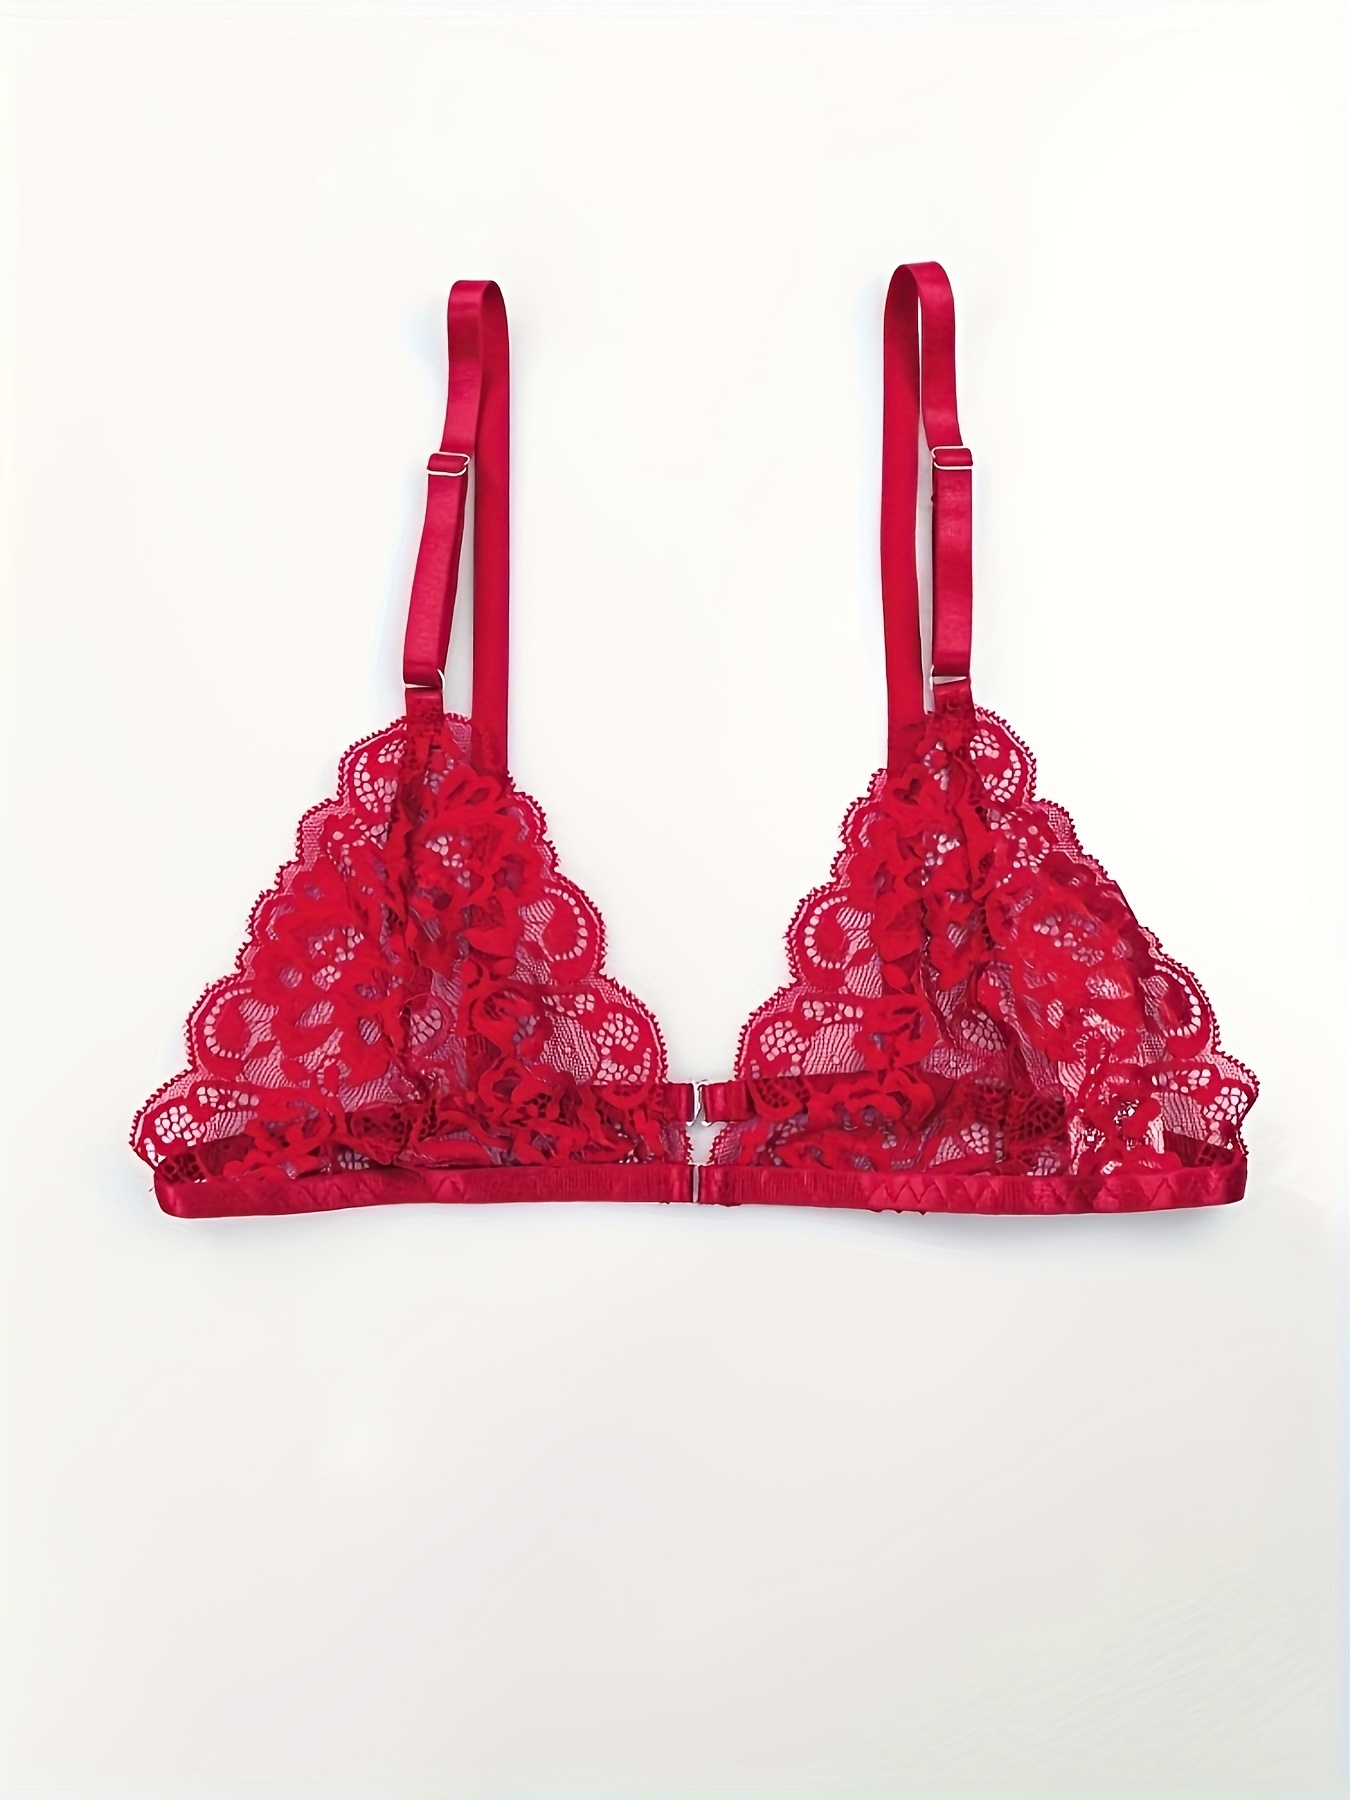 Red Bra Lingerie Tulip Passion Dessous Out of French Lace Bra in Red Tuille  